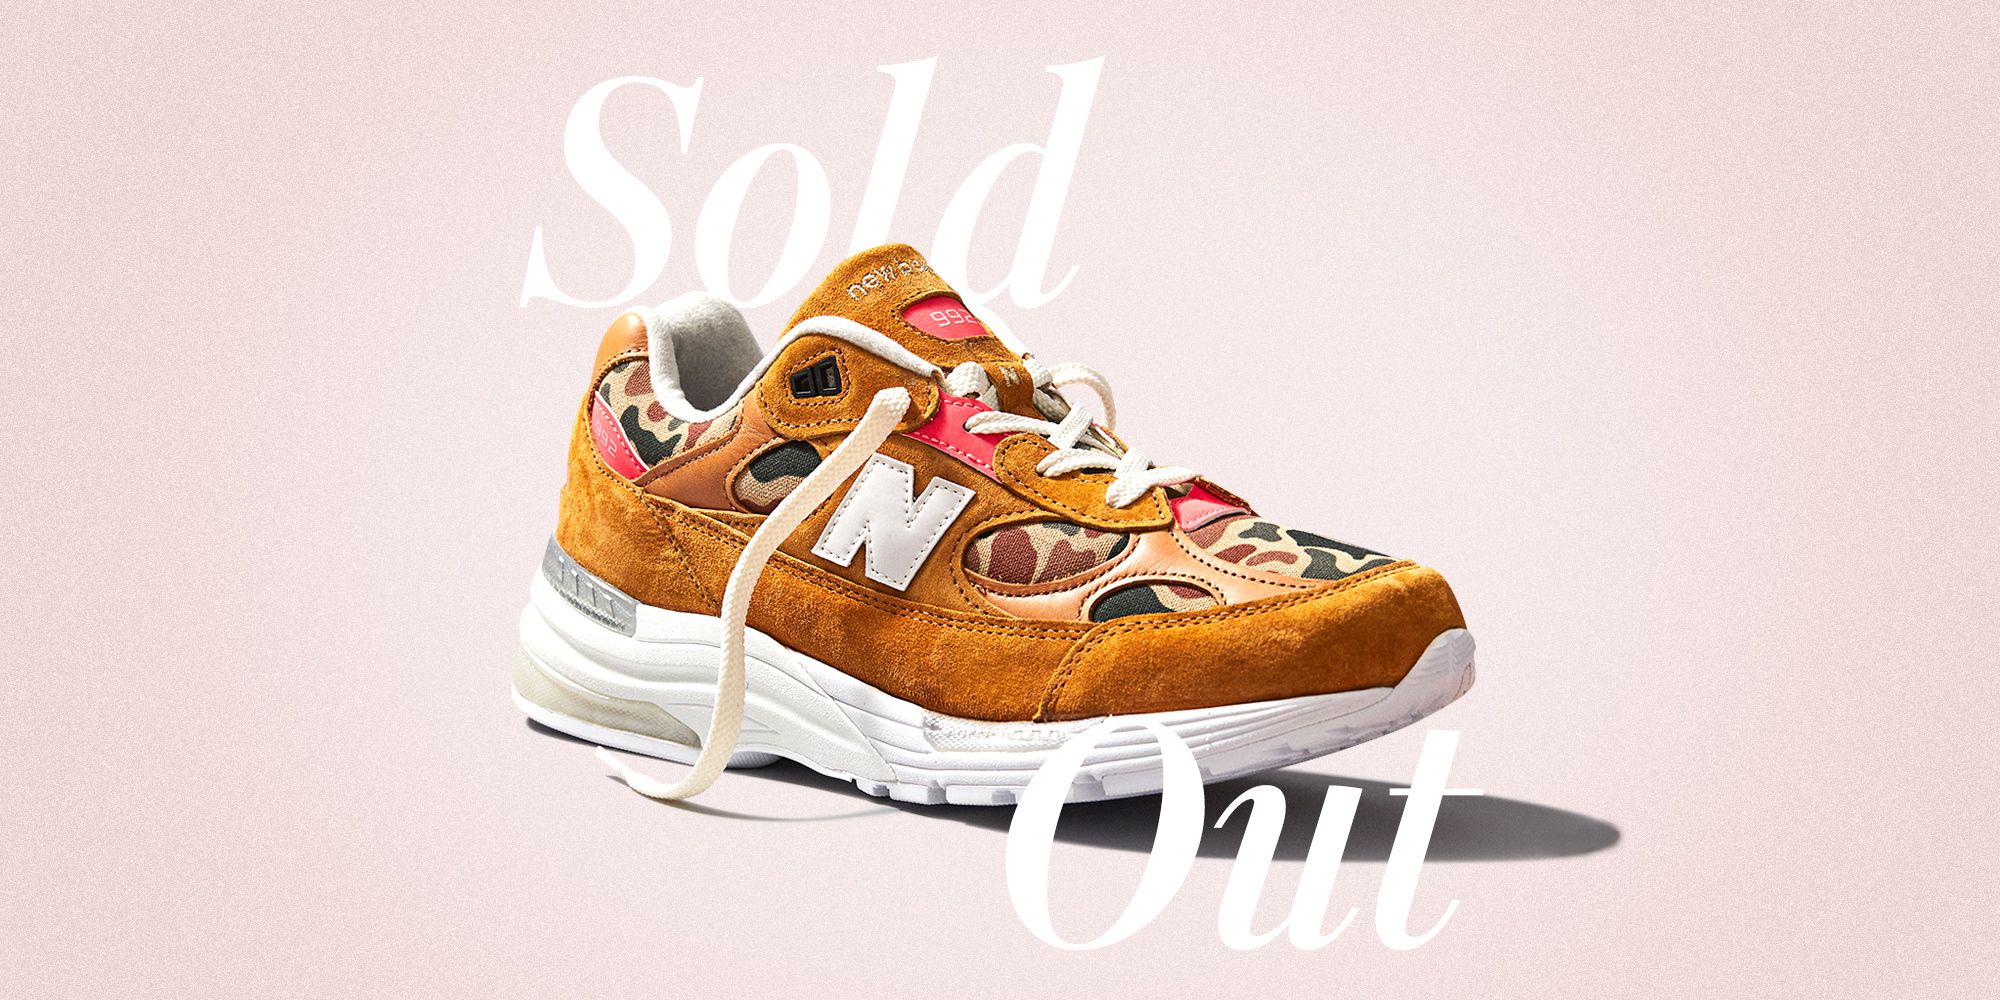 Todd Snyder x New Balance 992 'From Away' Sneakers Sold Out